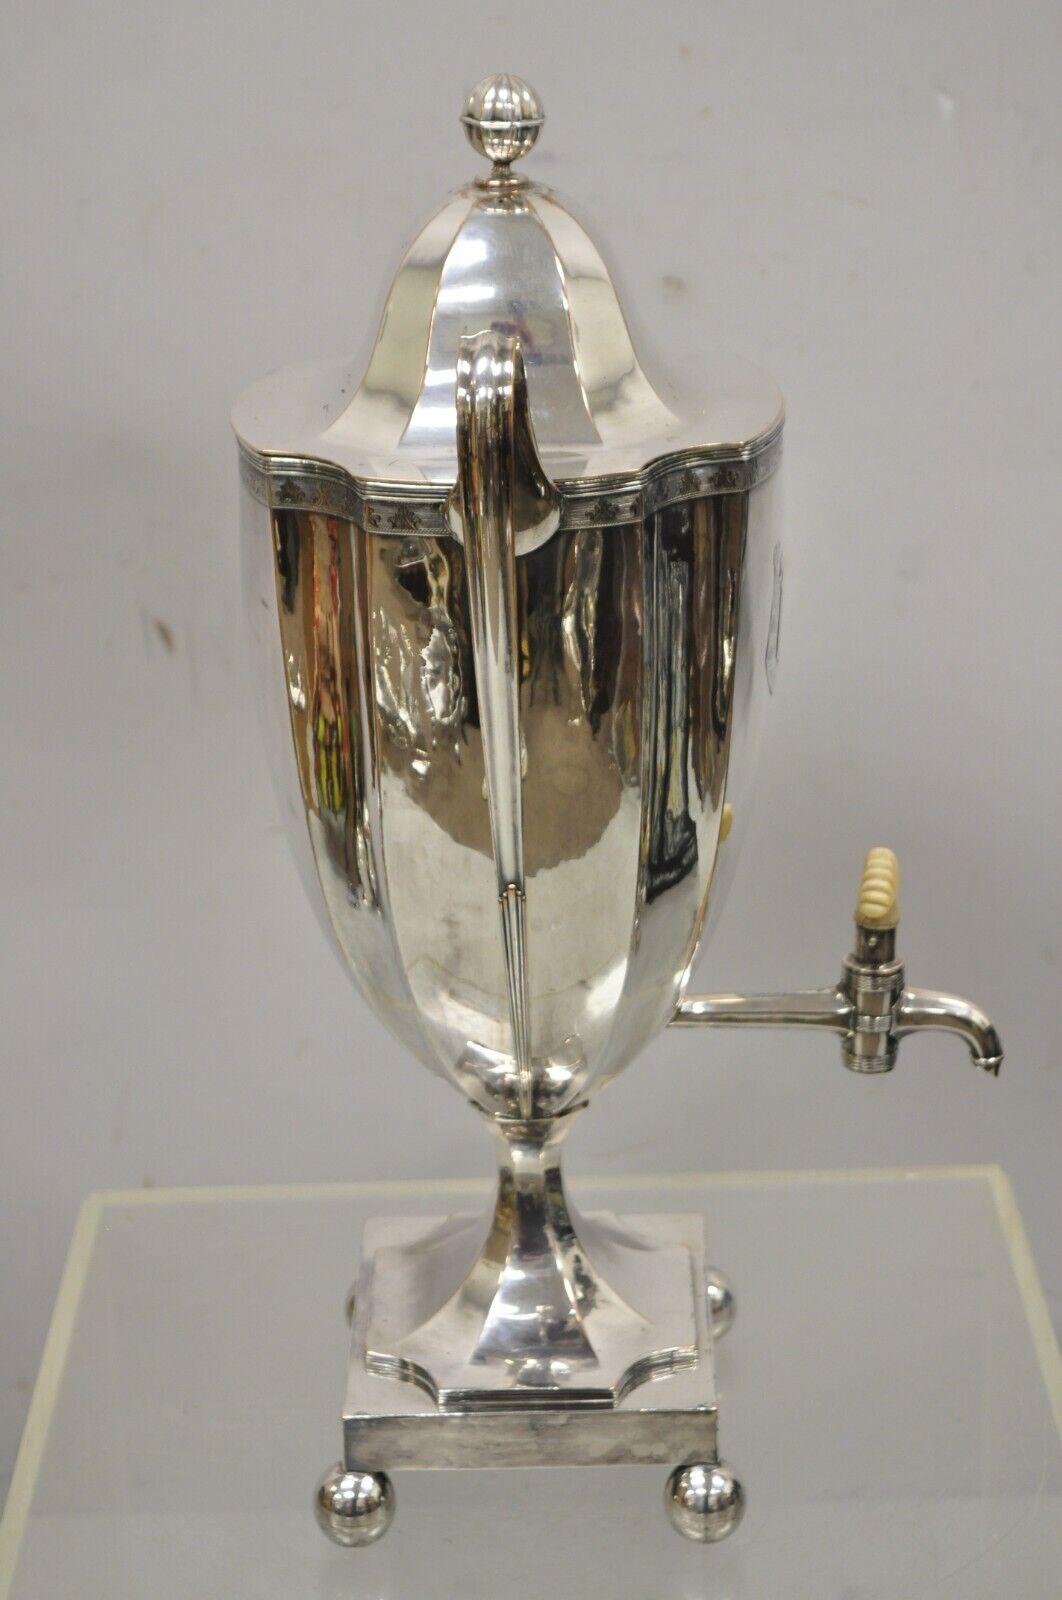 19th Century English Victorian Regency Silver Plate Trophy Cup Urn Coffee Dispenser Samovar For Sale